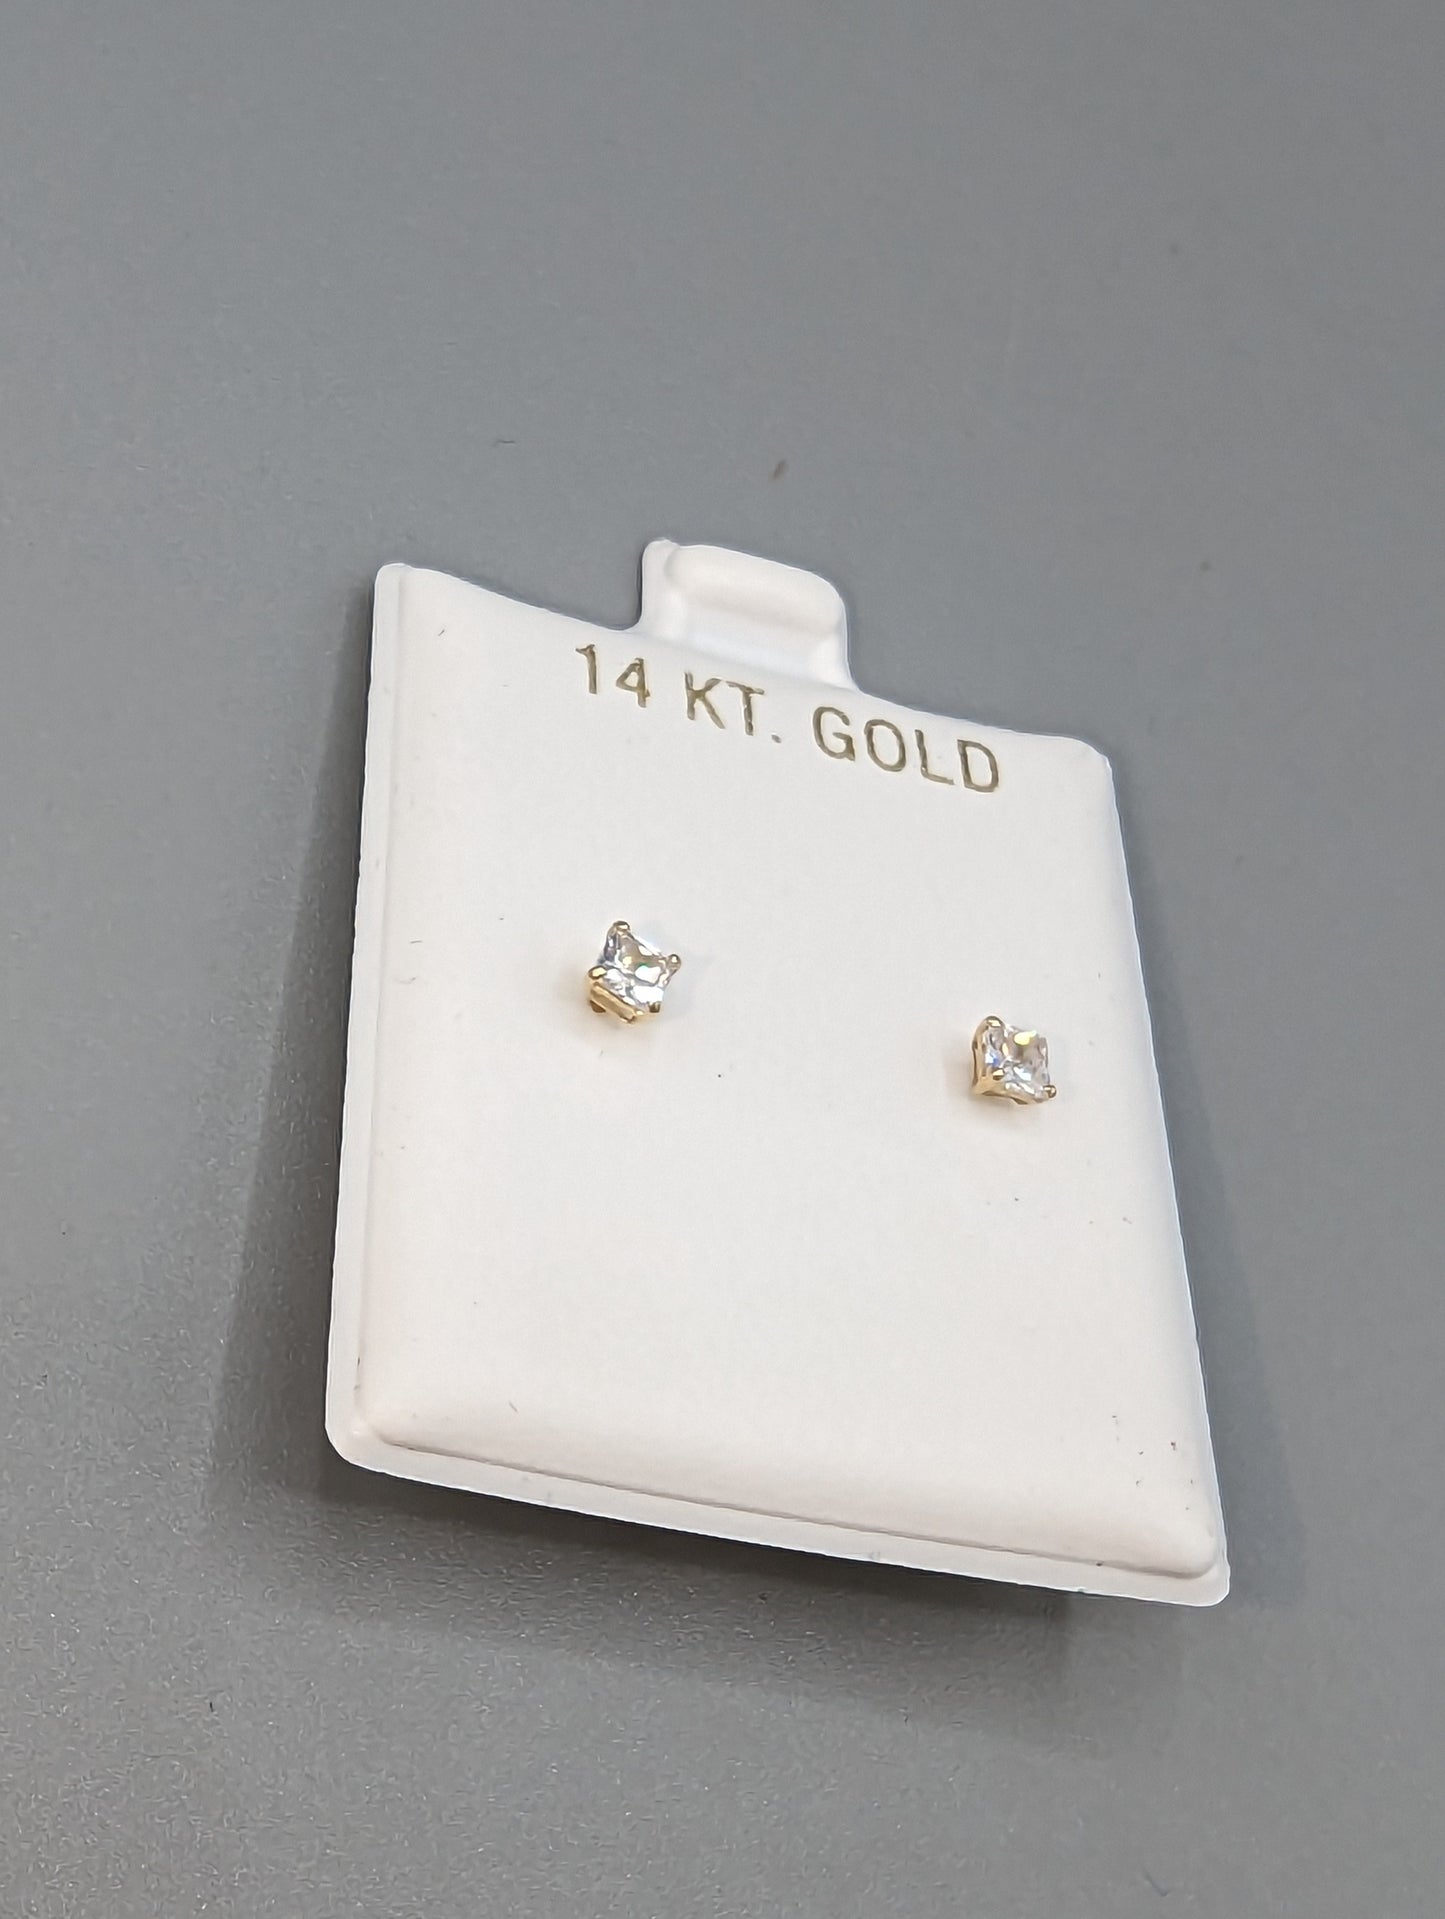 14k Earrings with cz stones - 1 PER ORDER!